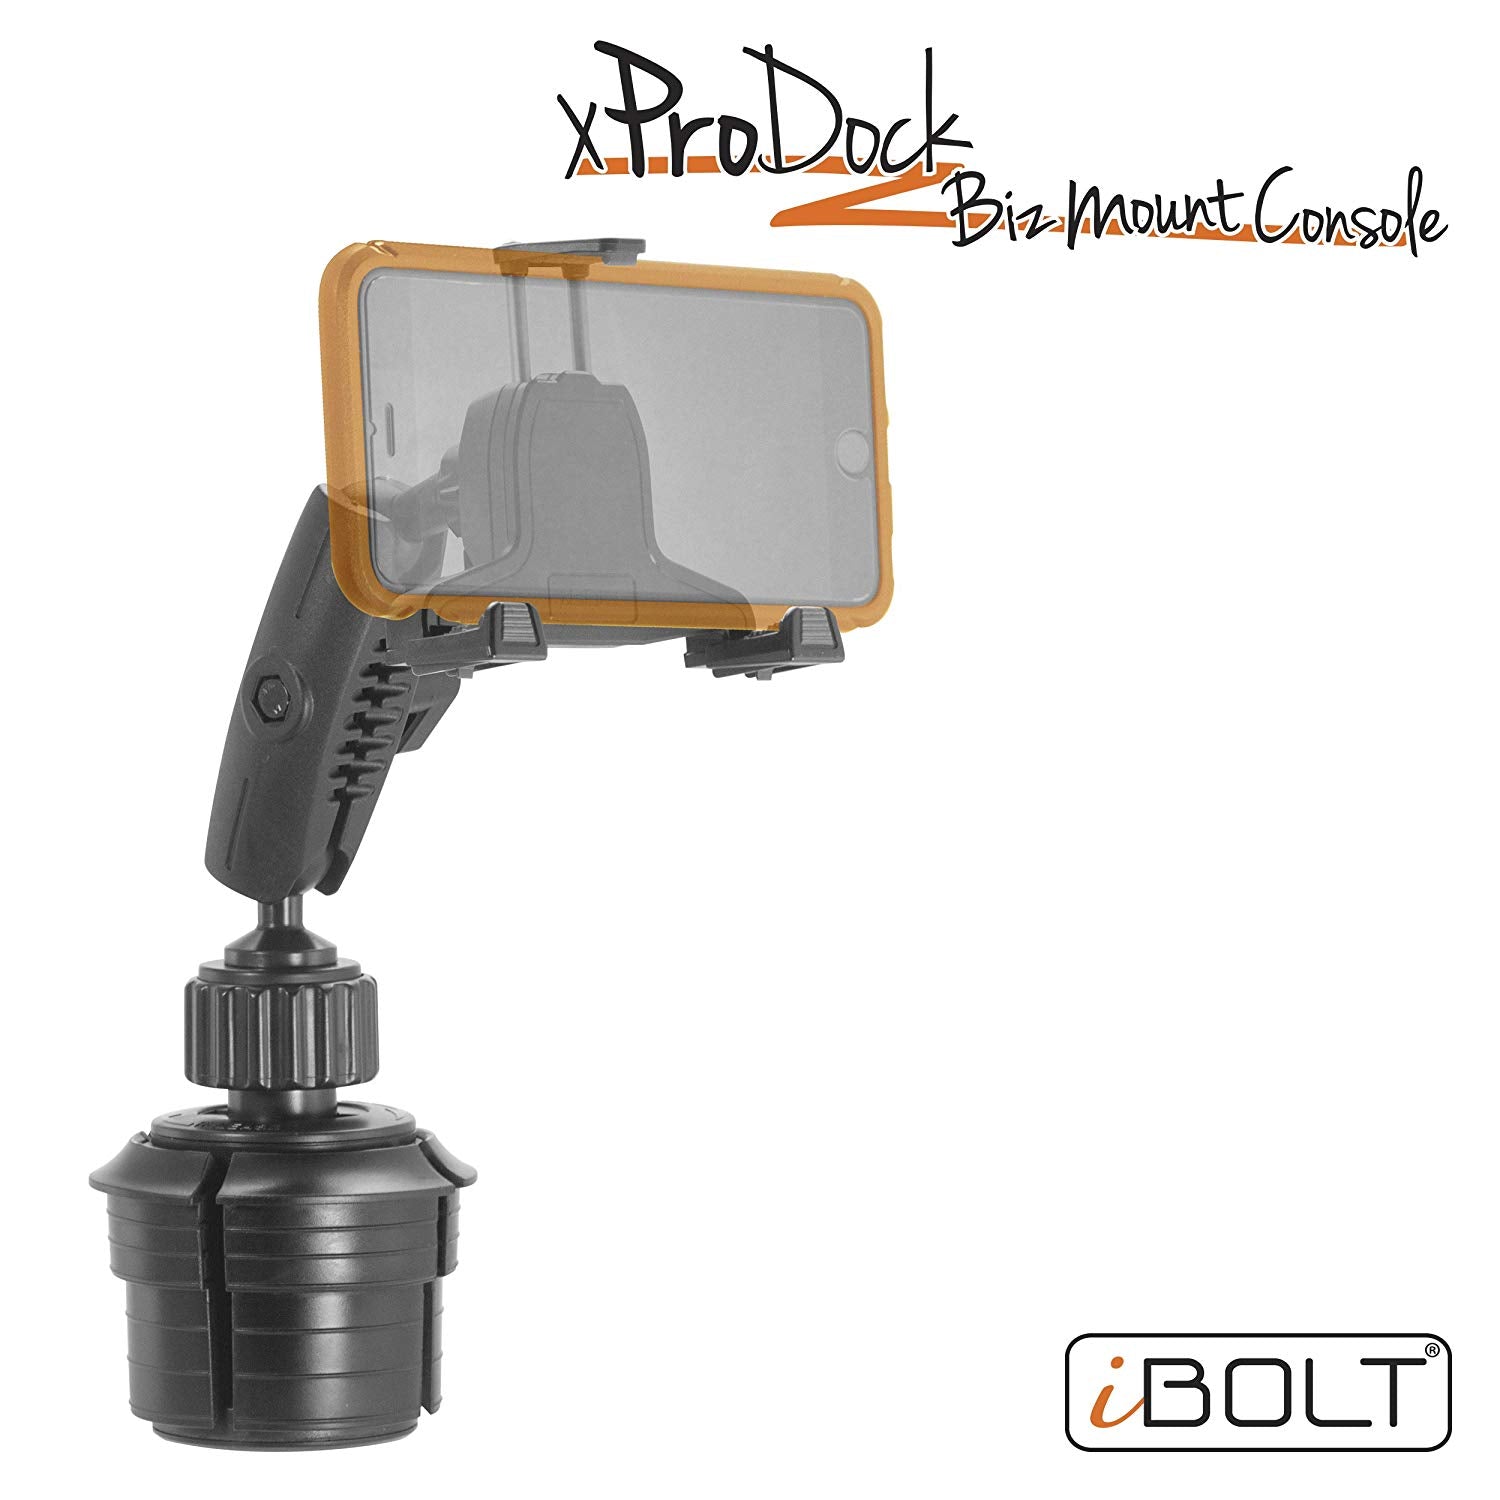 iBOLT™ xProDock™ Bizmount™ Console- Phone Cup Holder Mount